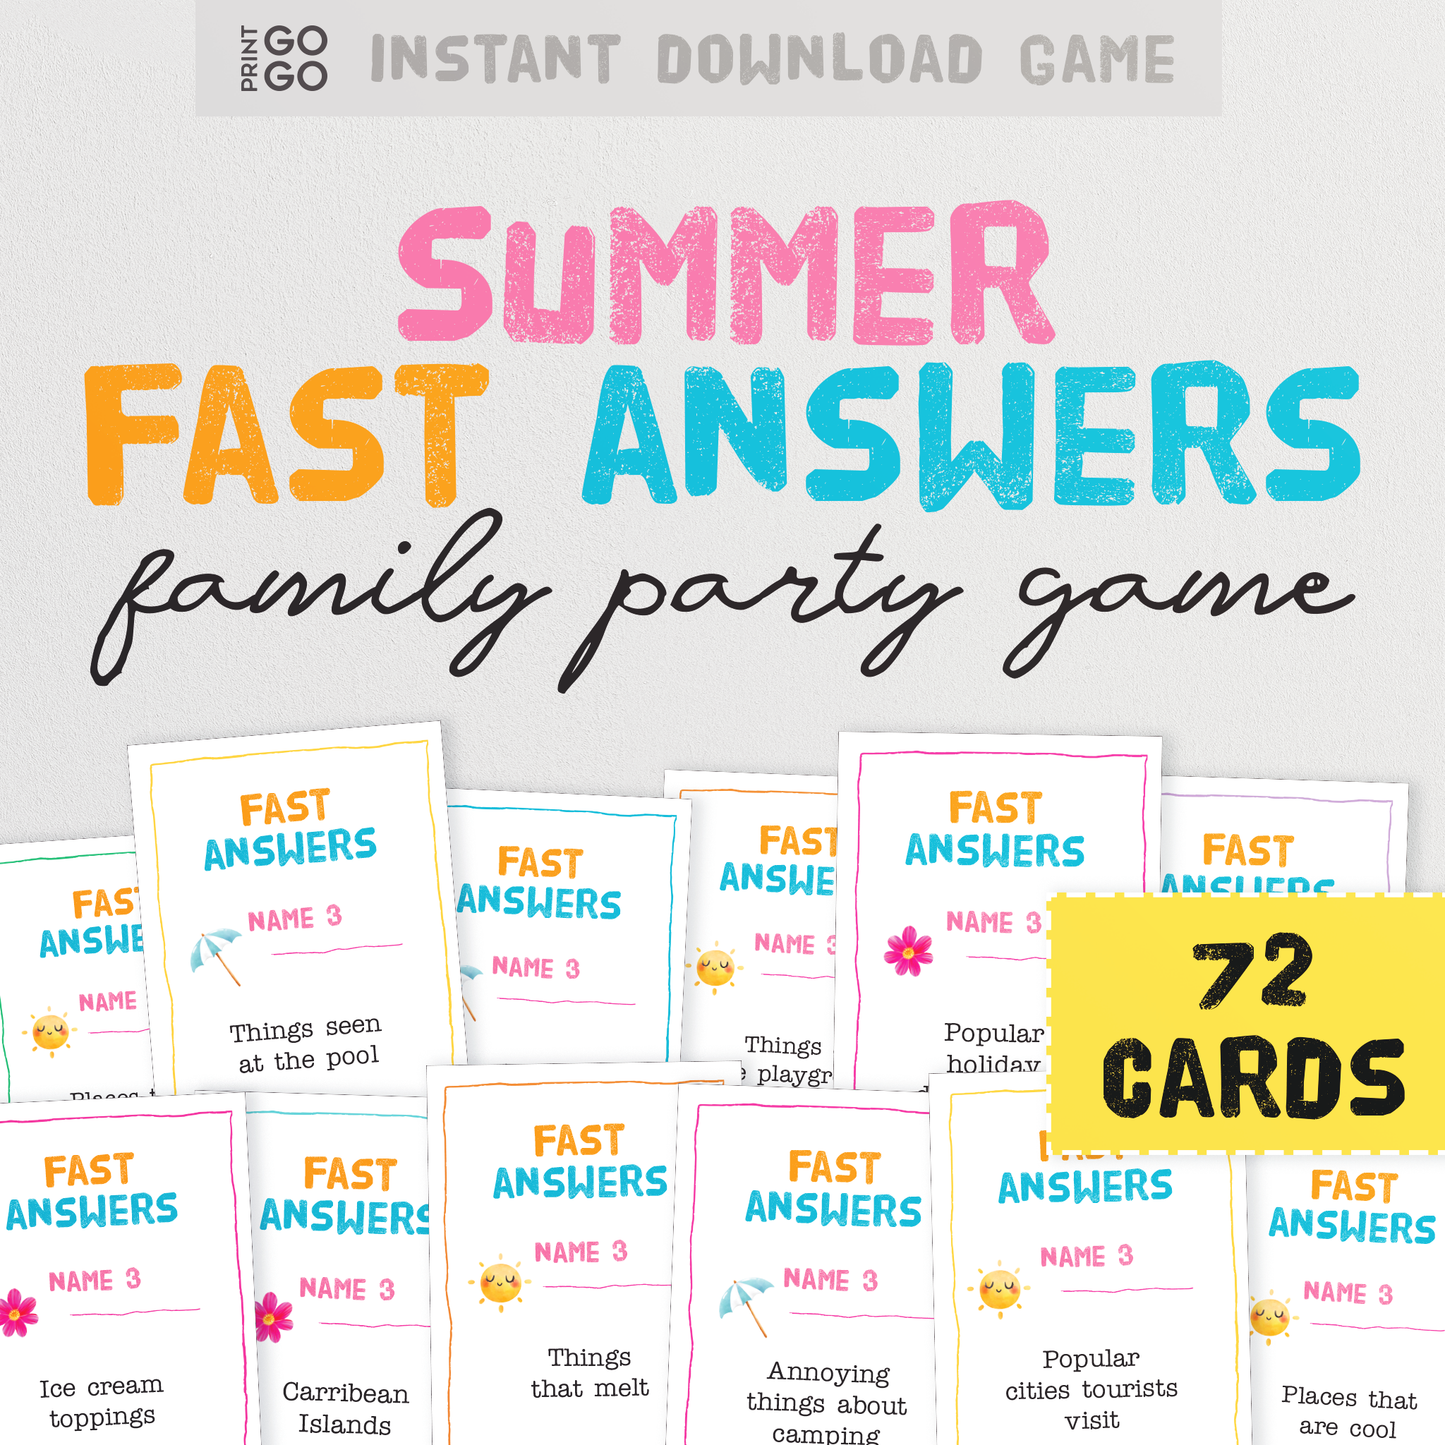 Summer Fast Answers - The Fun Quick Thinking Family Friendly Party Game